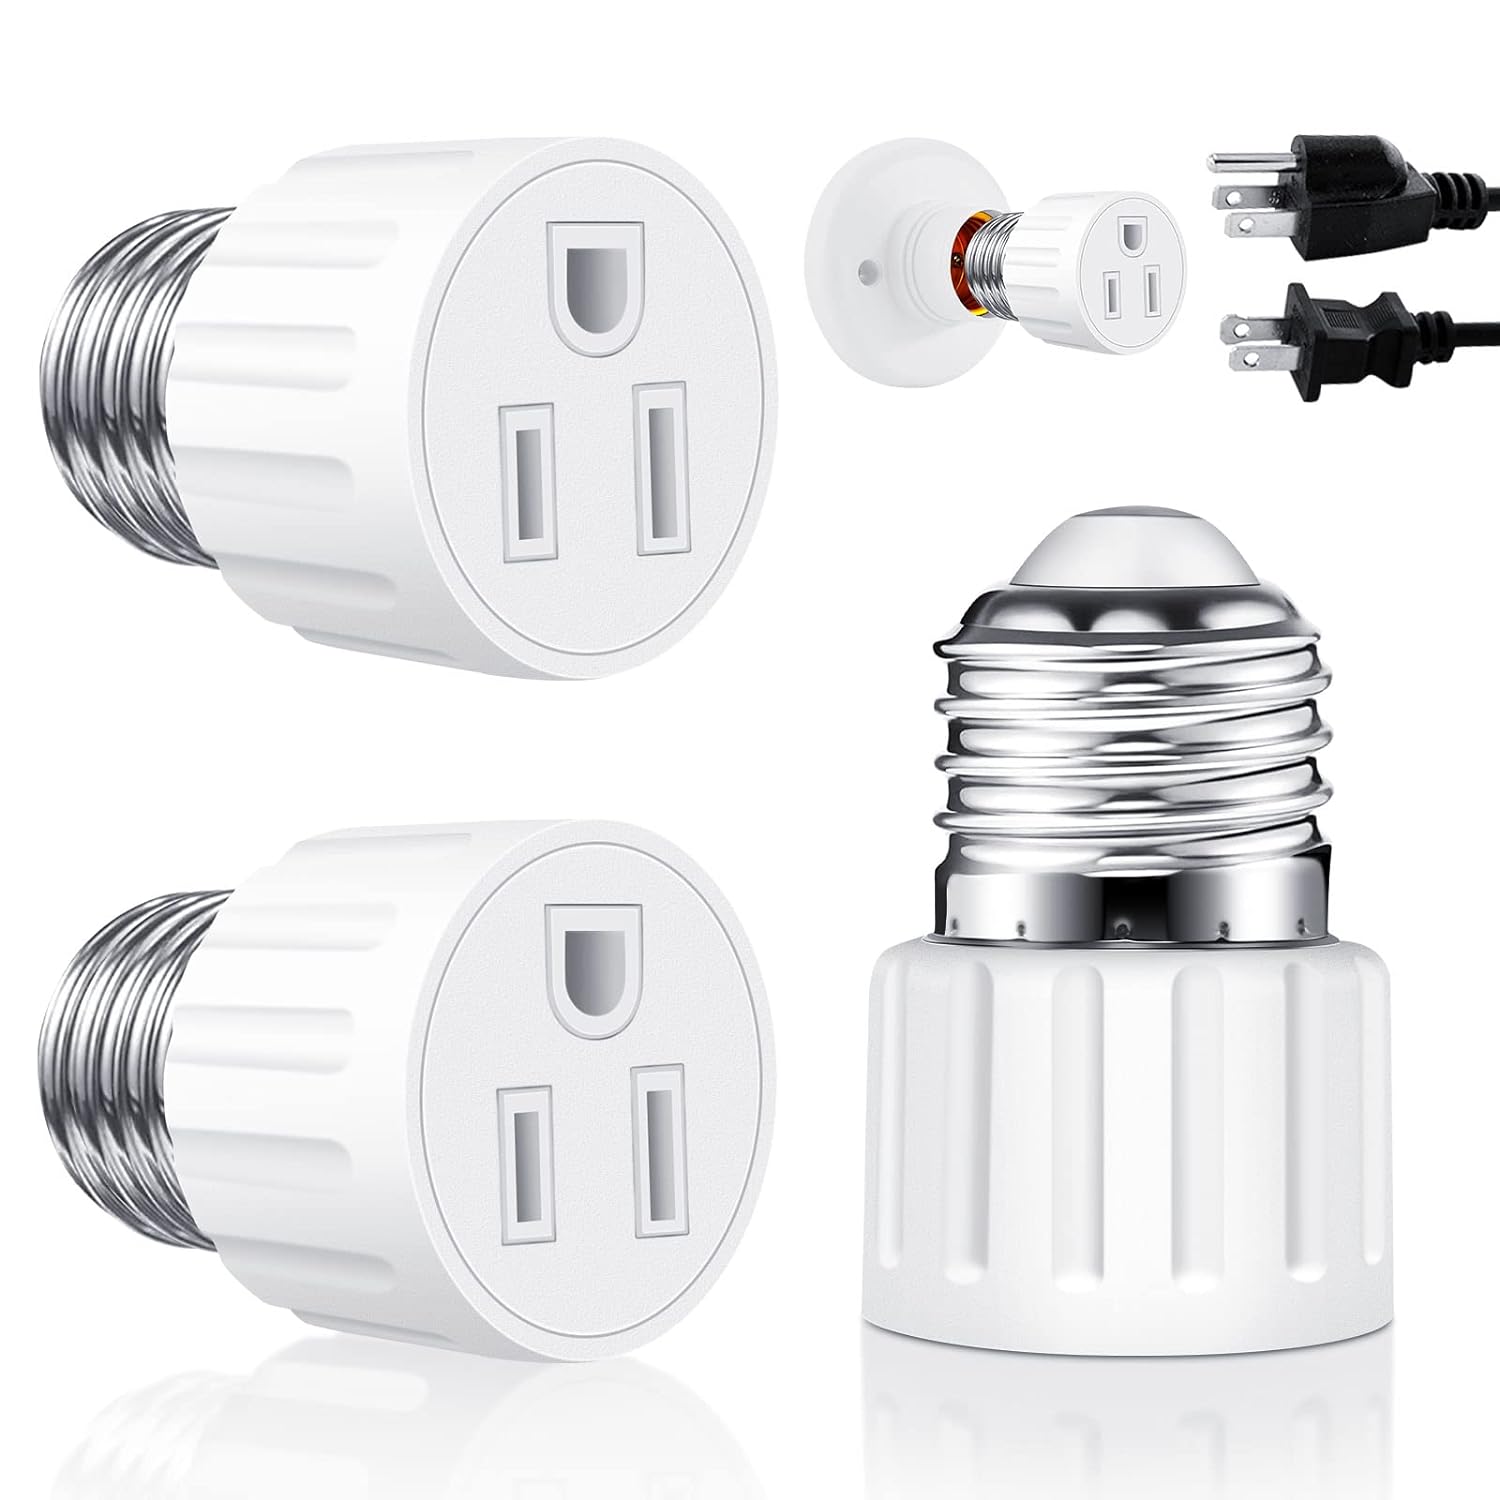 Generic 2 Pack E26/E27 3 Prong Light Socket to Plug Adapter, Polarized Screw in Outlet for Light Socket Adapter Outlet 3Prong Light Bul